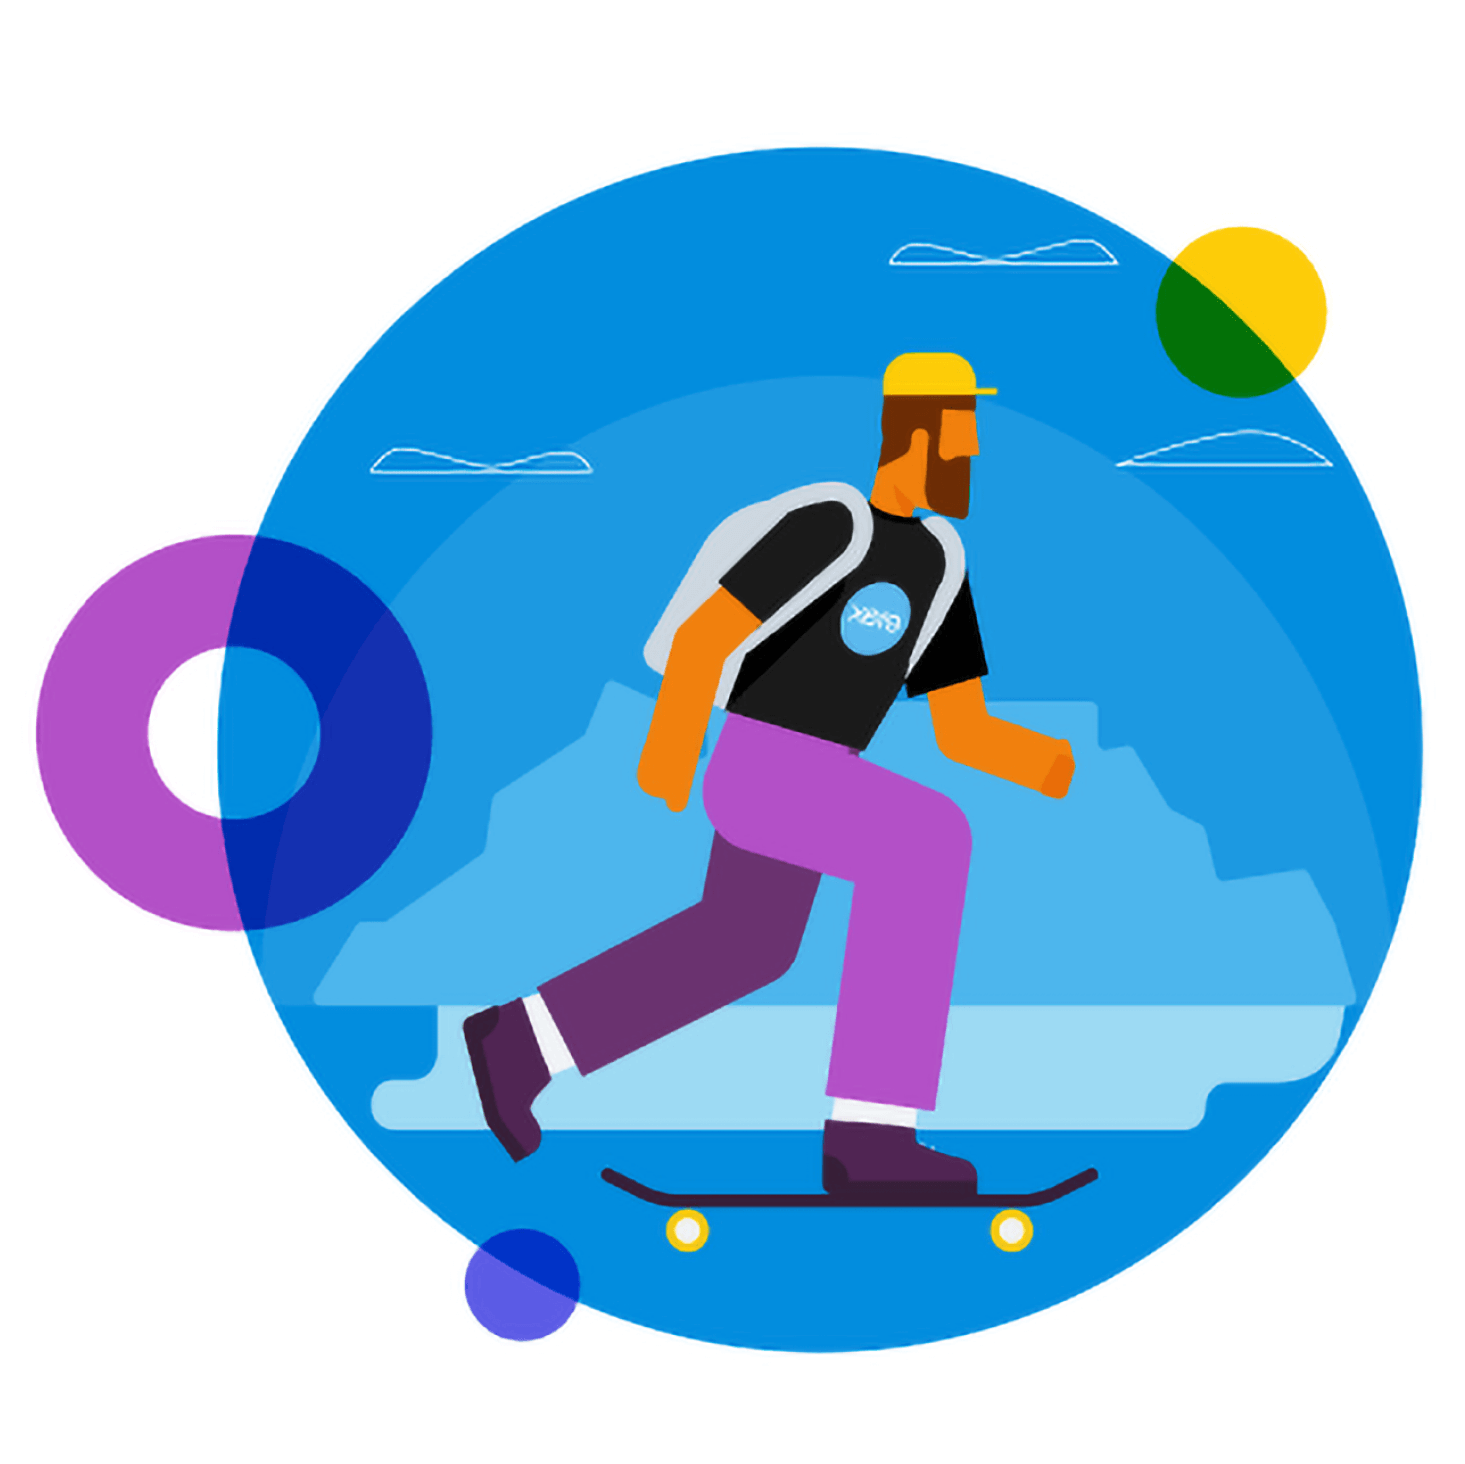 A summer intern skateboards to the Xero office with a backpack on his back.